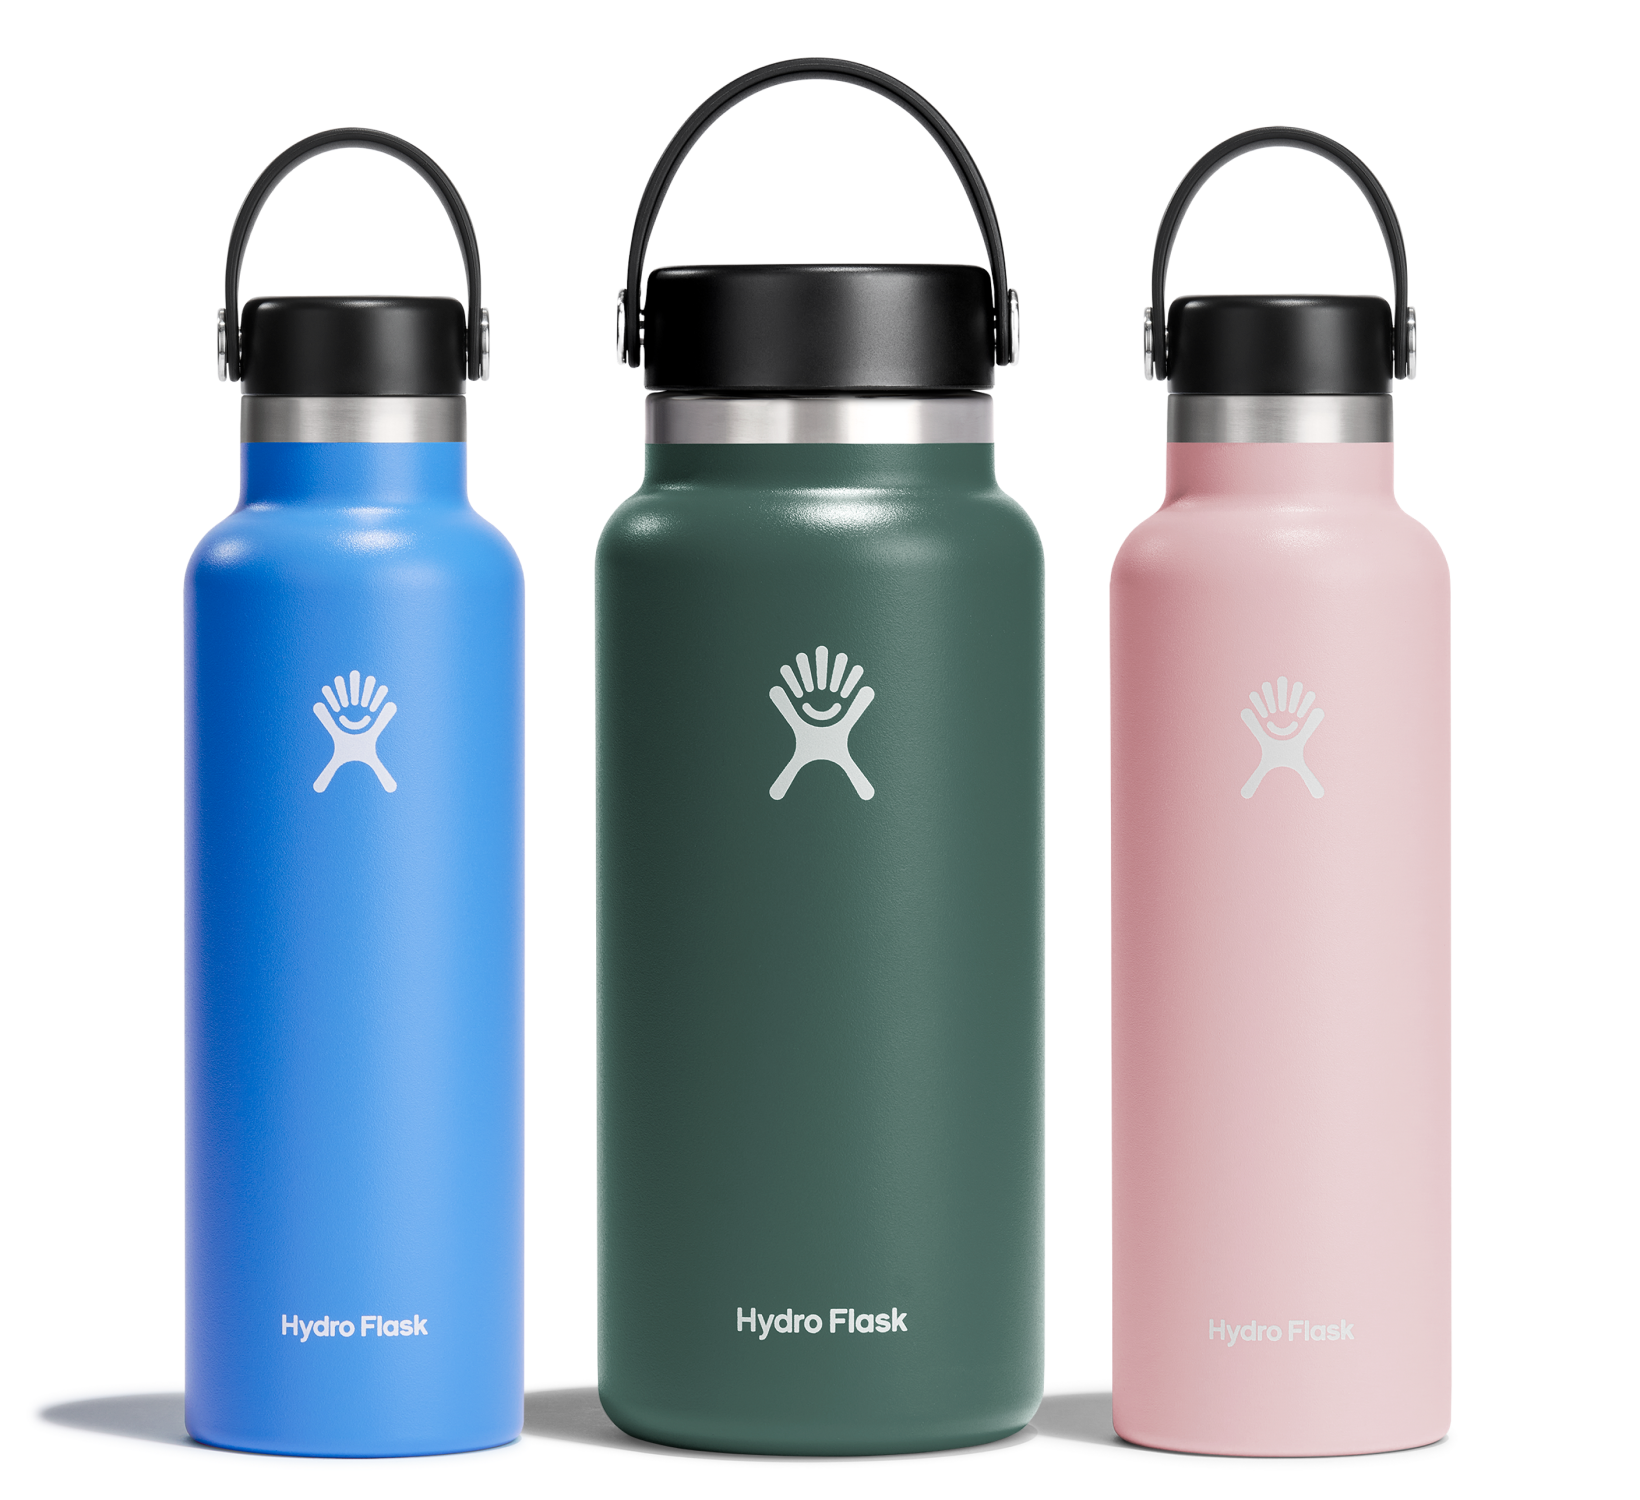 Designed for on-the-go hydration, our Bottles will keep you ready to take on any adventure!